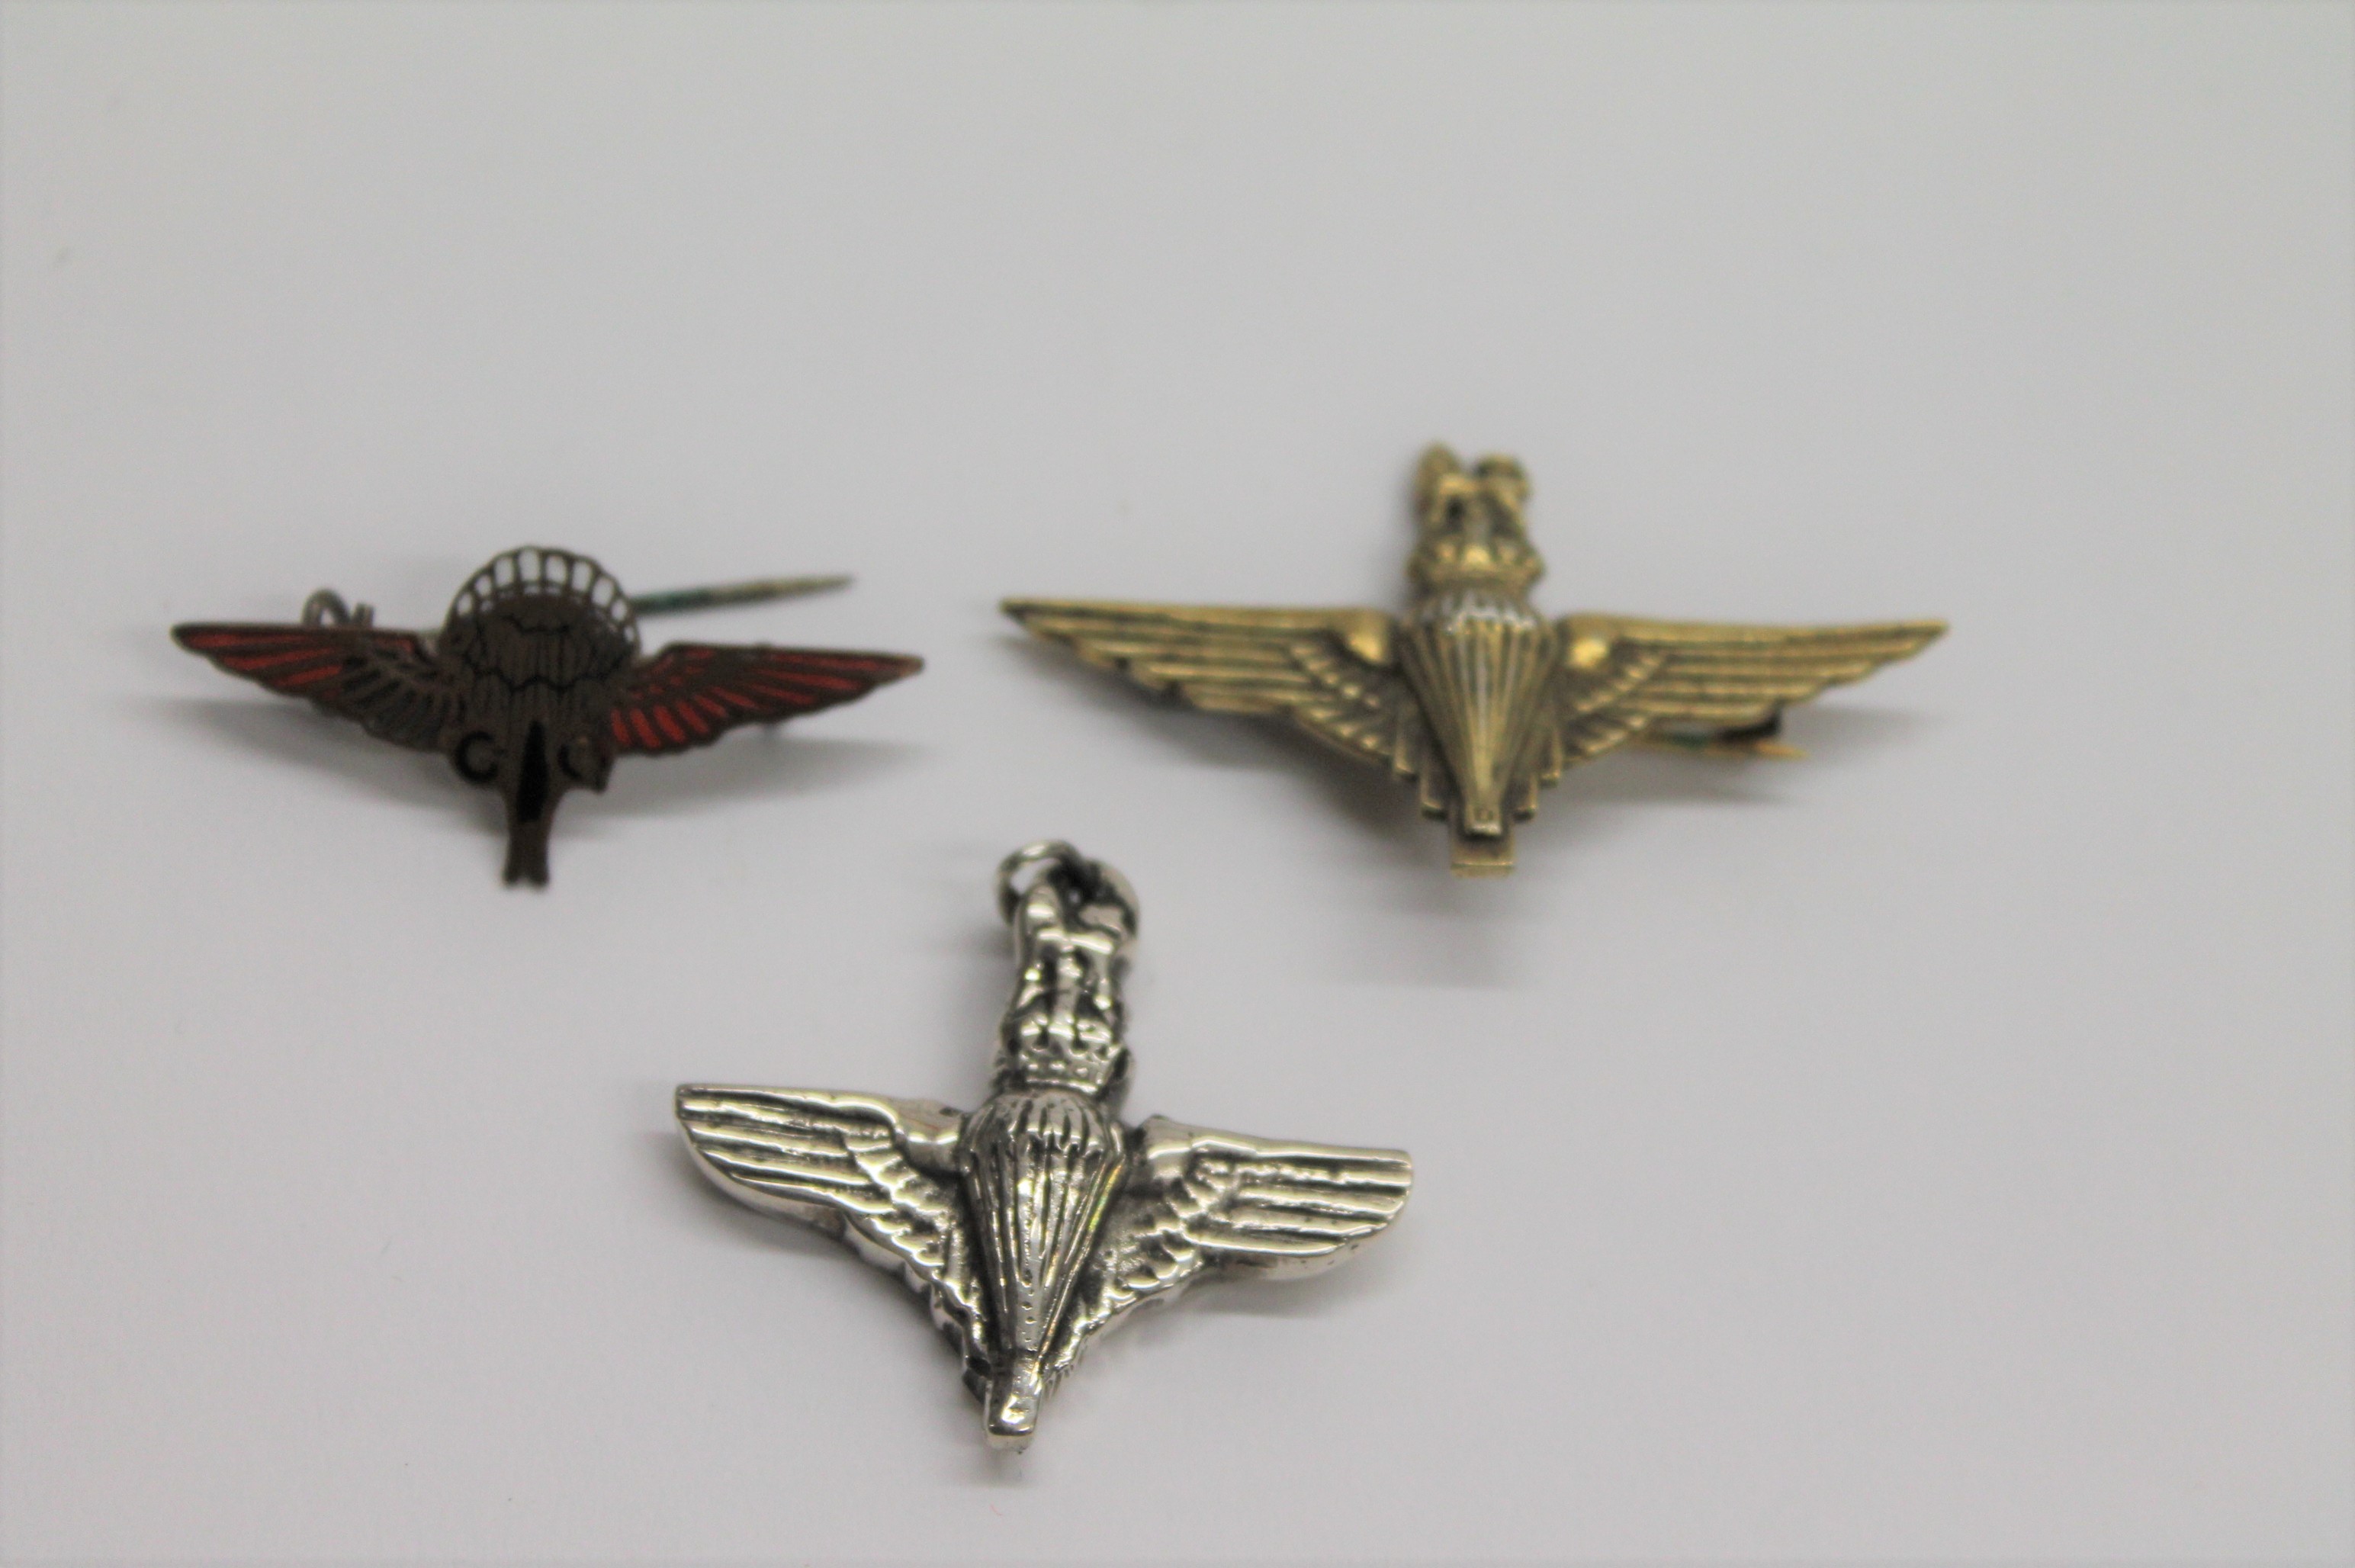 PARACHUTIST's RELATED SWEETHEART BROOCHES. 1. A necklace or neck worn brooch marked 925 parachute